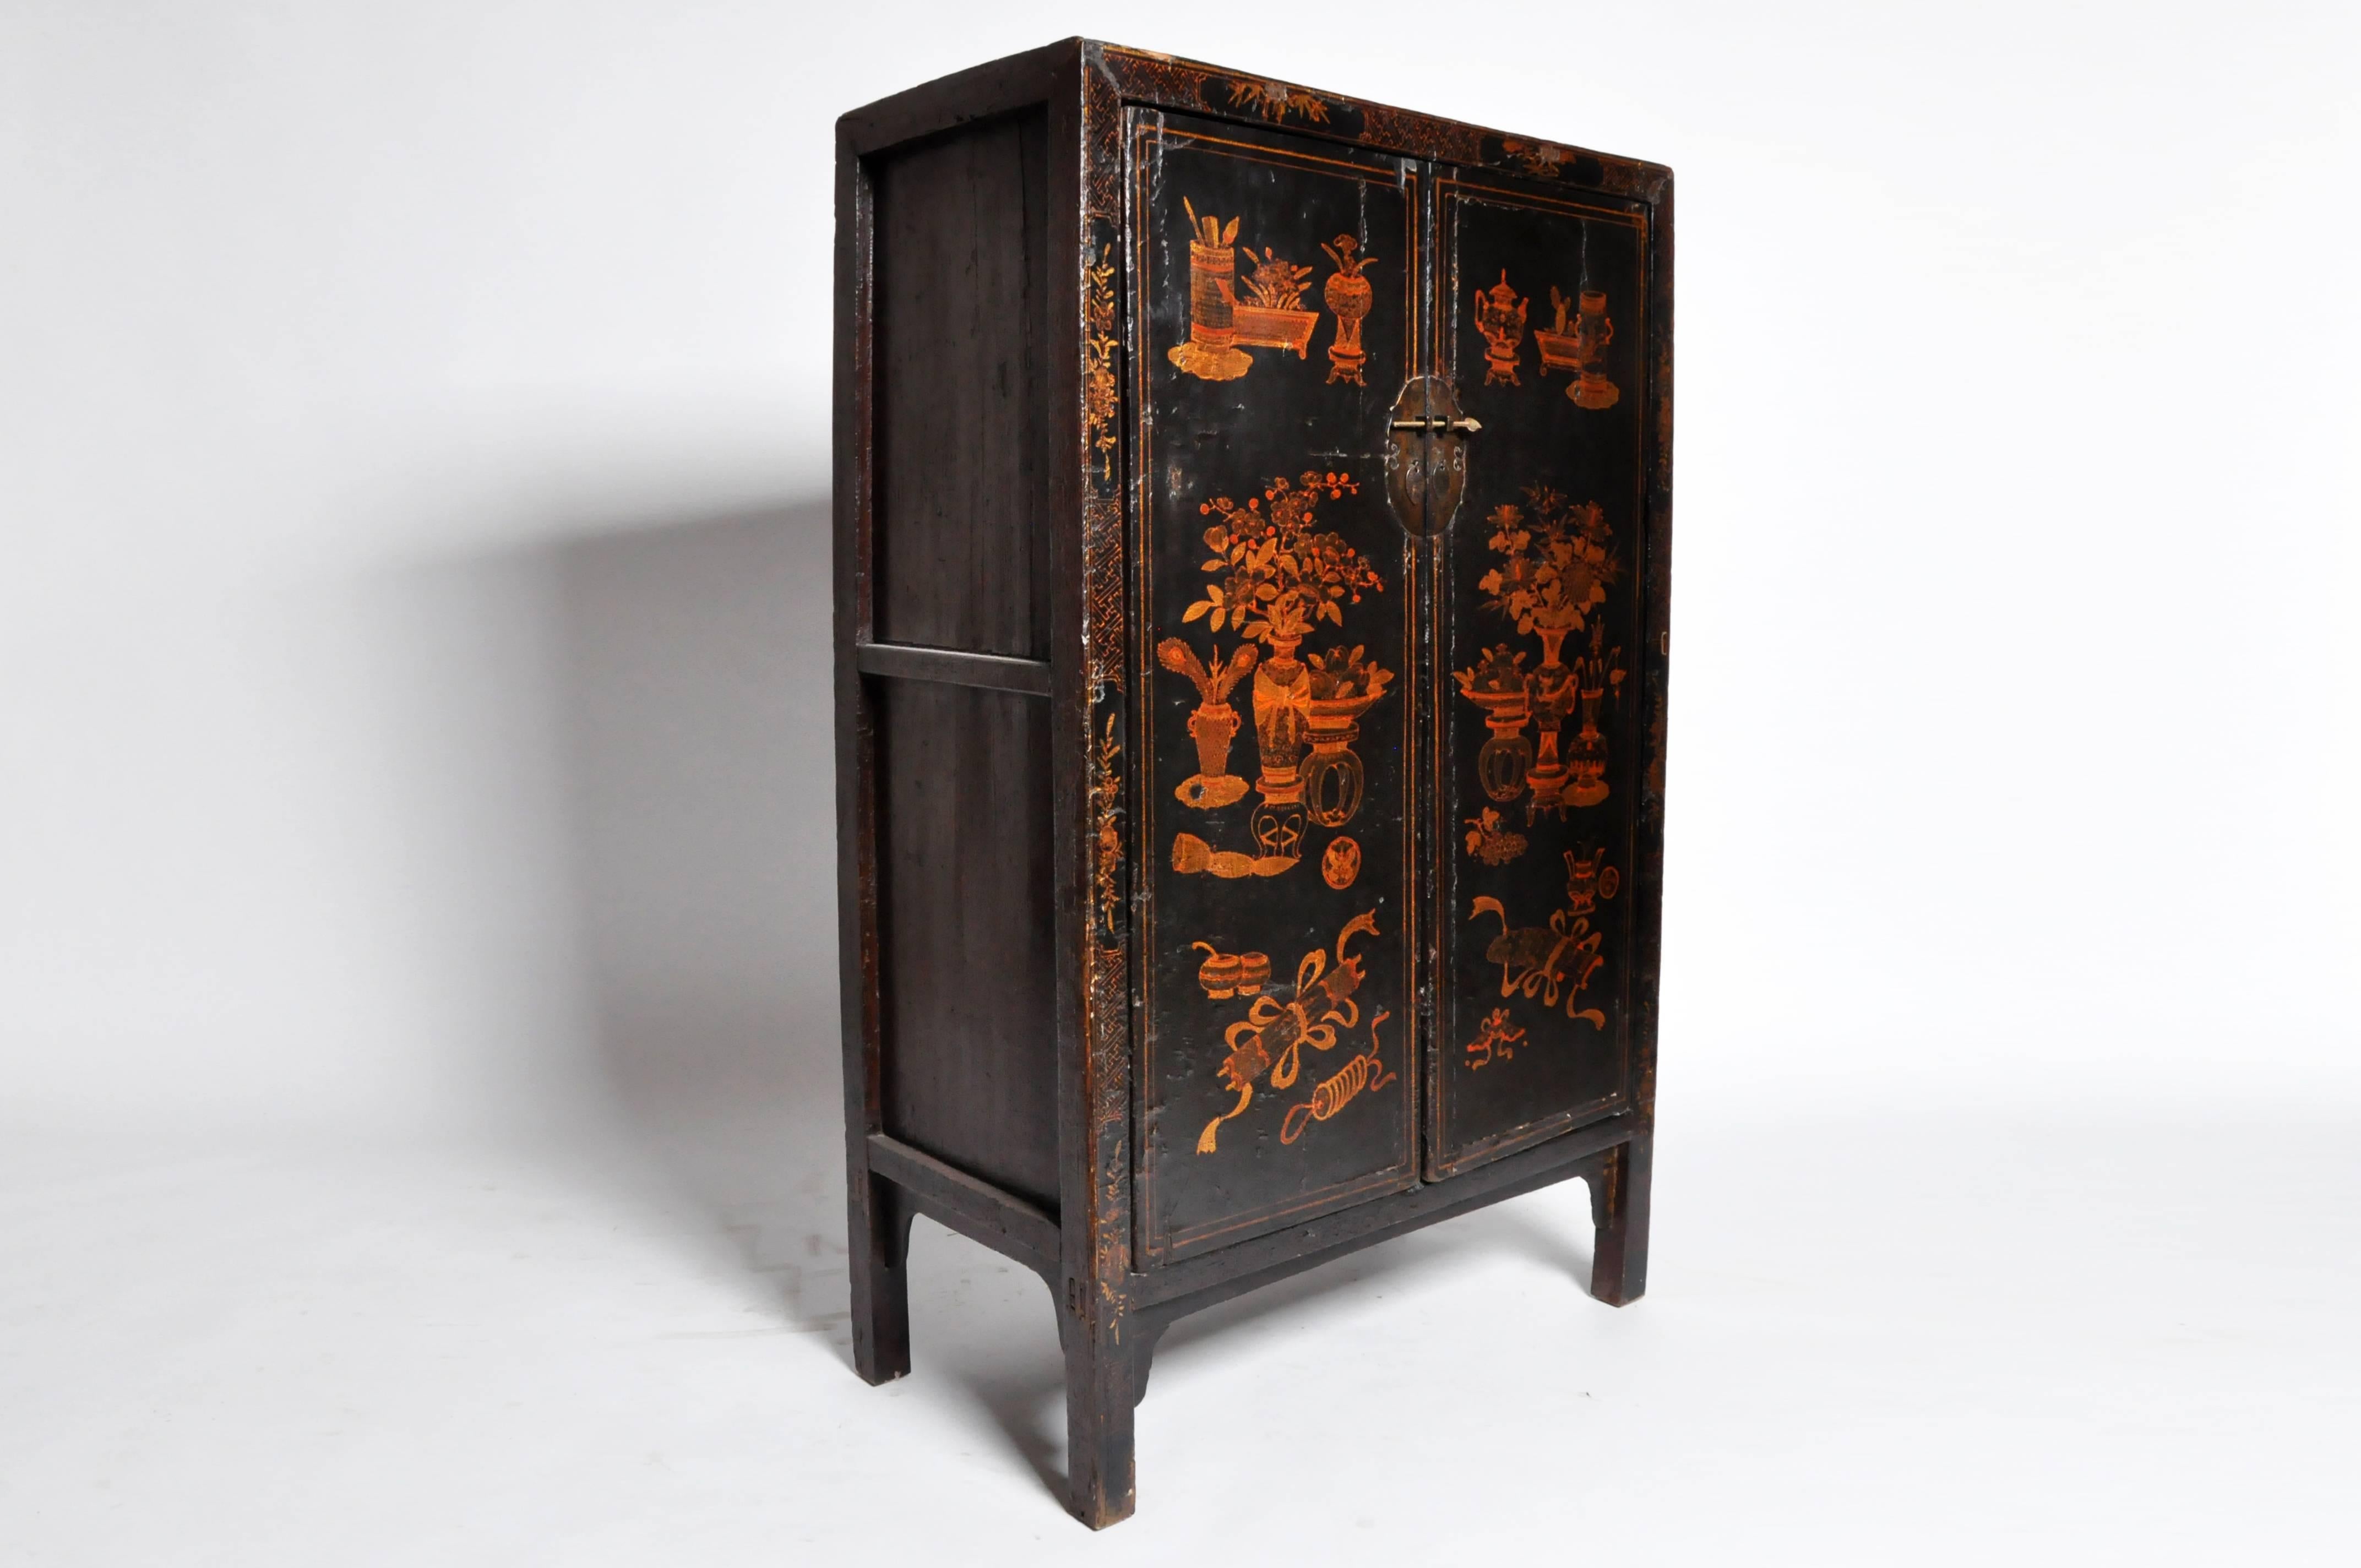 This gorgeous square-corner cabinet with hand-painted decoration hails from the Qing dynasty China, otherwise known as the Qing Empire. Furniture from this era reveals an increasing predilection for high style furniture and elaborate design as wider